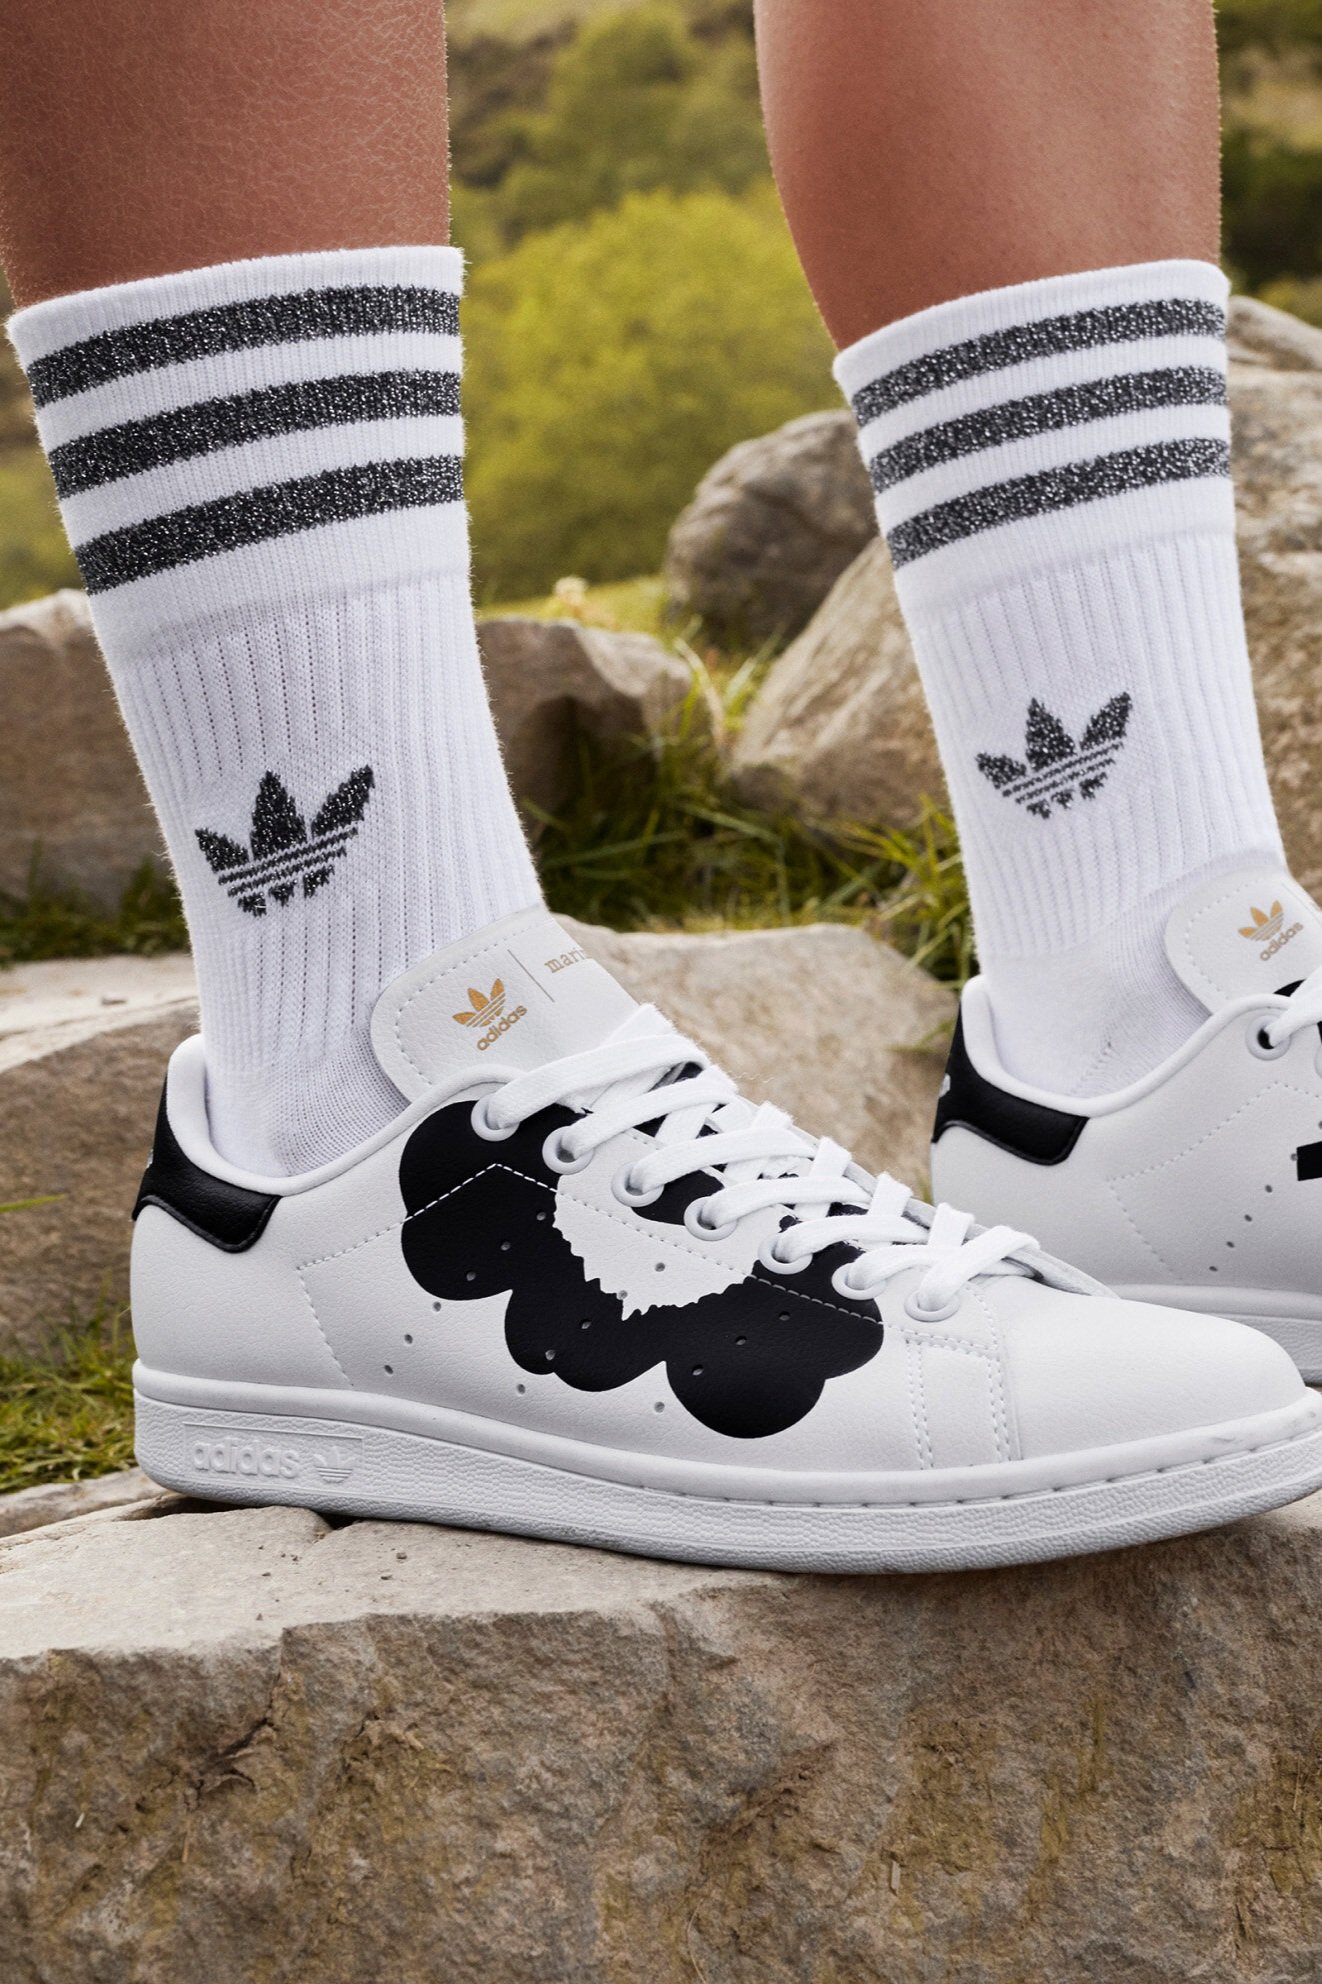 Marimekko X Adidas: The Poppy and Three Stripes are A Match Made in Heaven  — NORDIC STYLE MAG